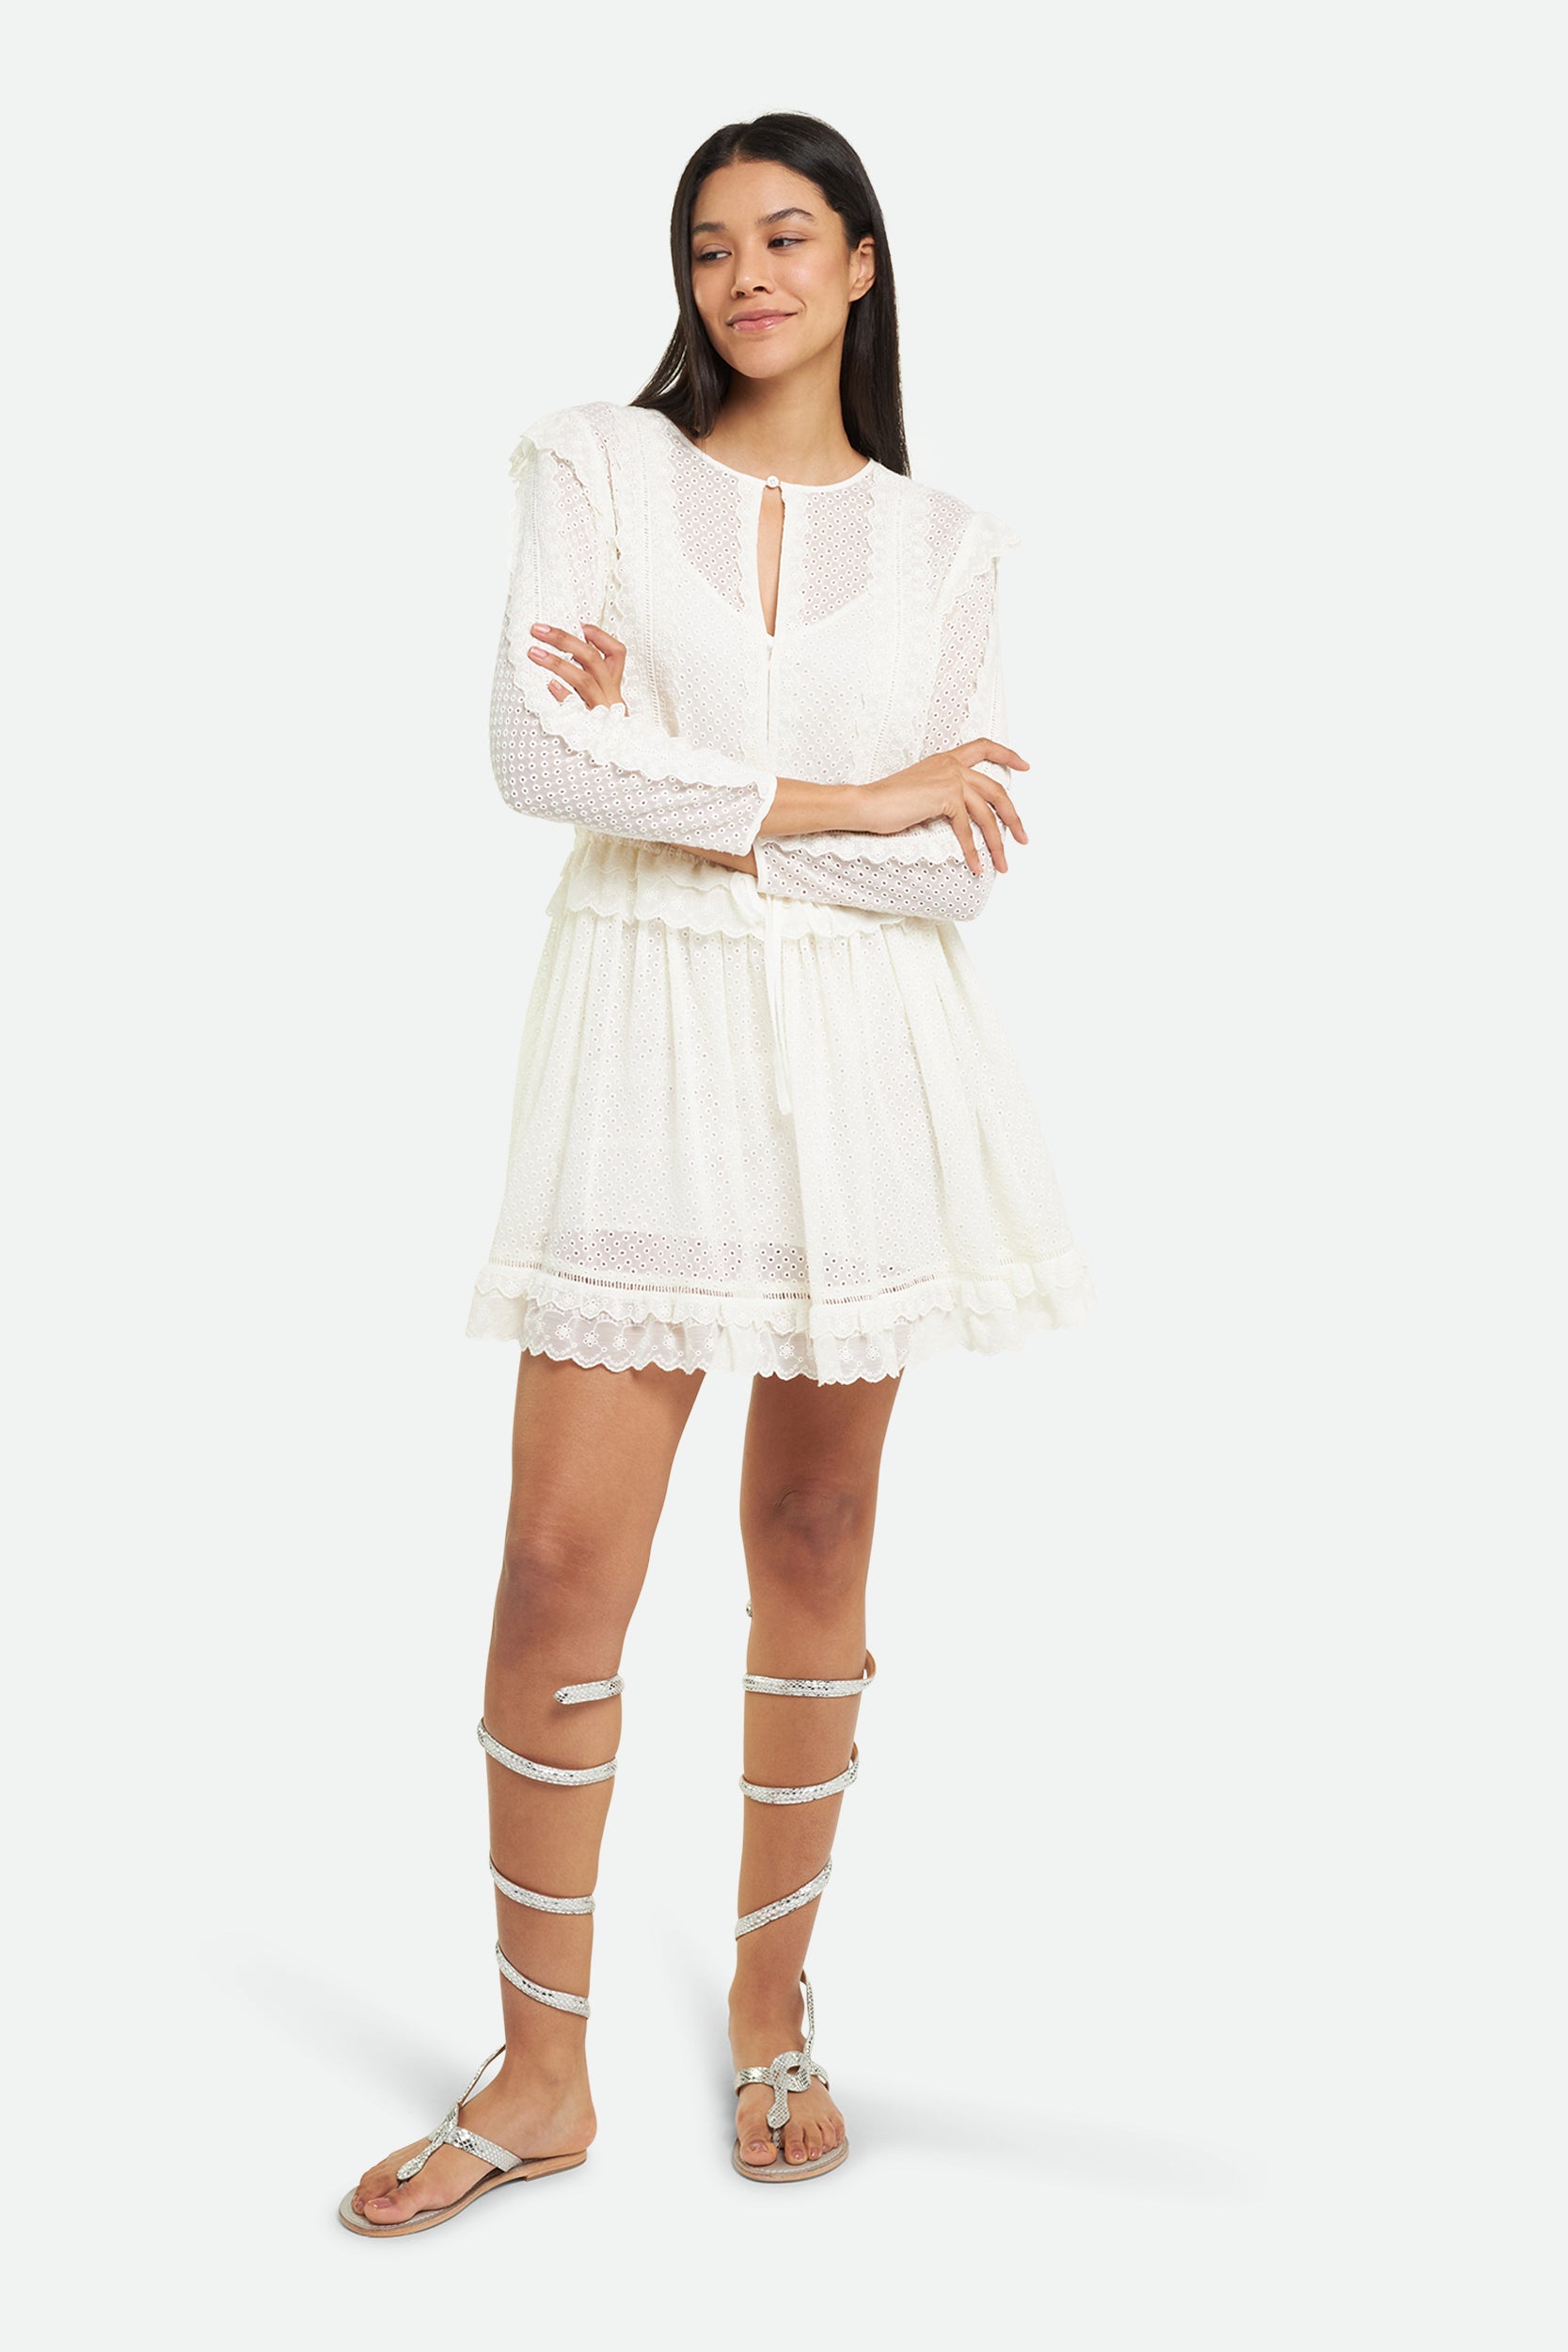 Twinset White Embroidered Dress